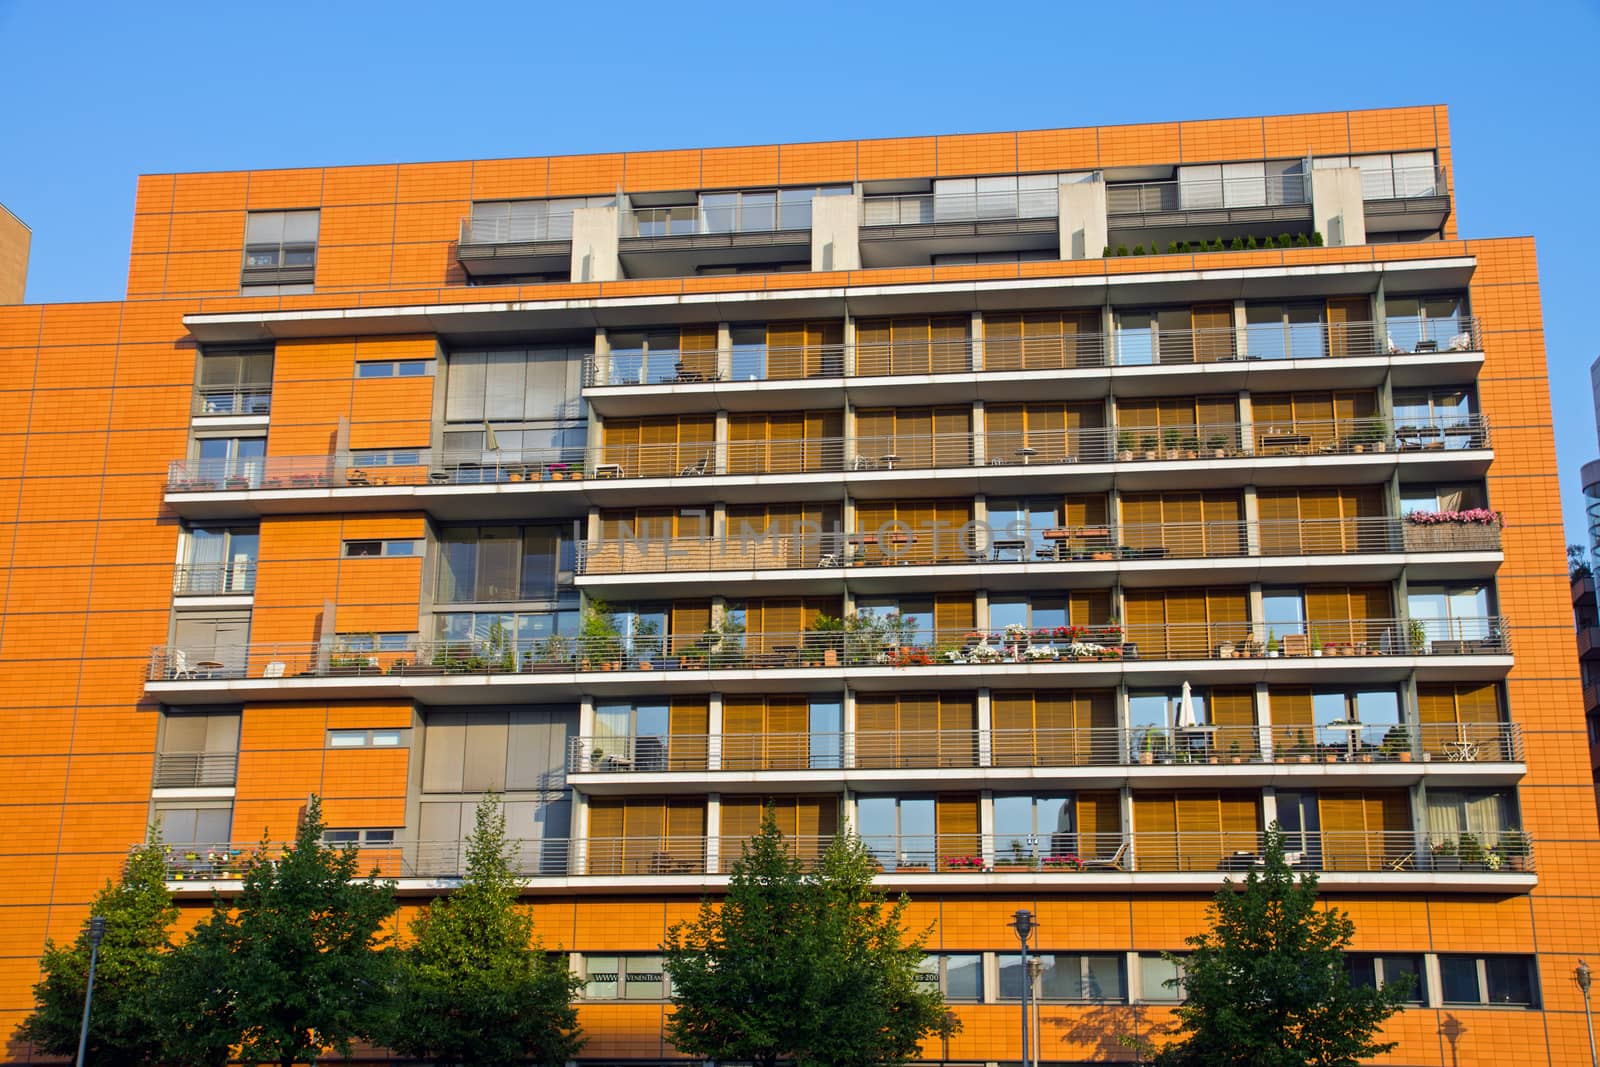 A modern orange building with rows of balconies